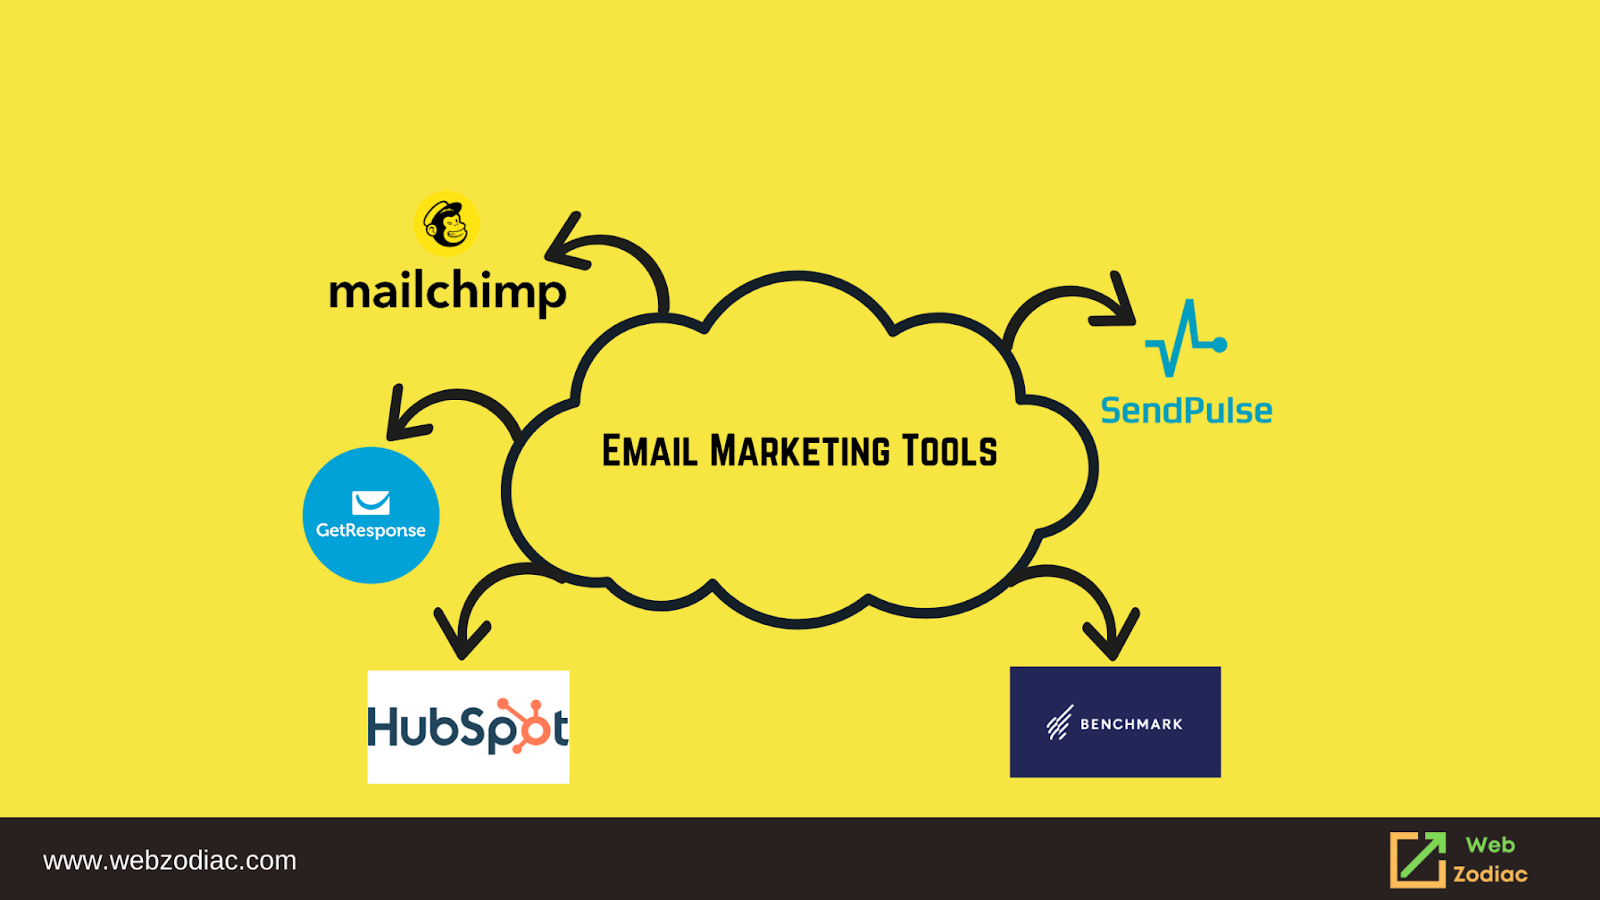 Email Marketing Tools Image